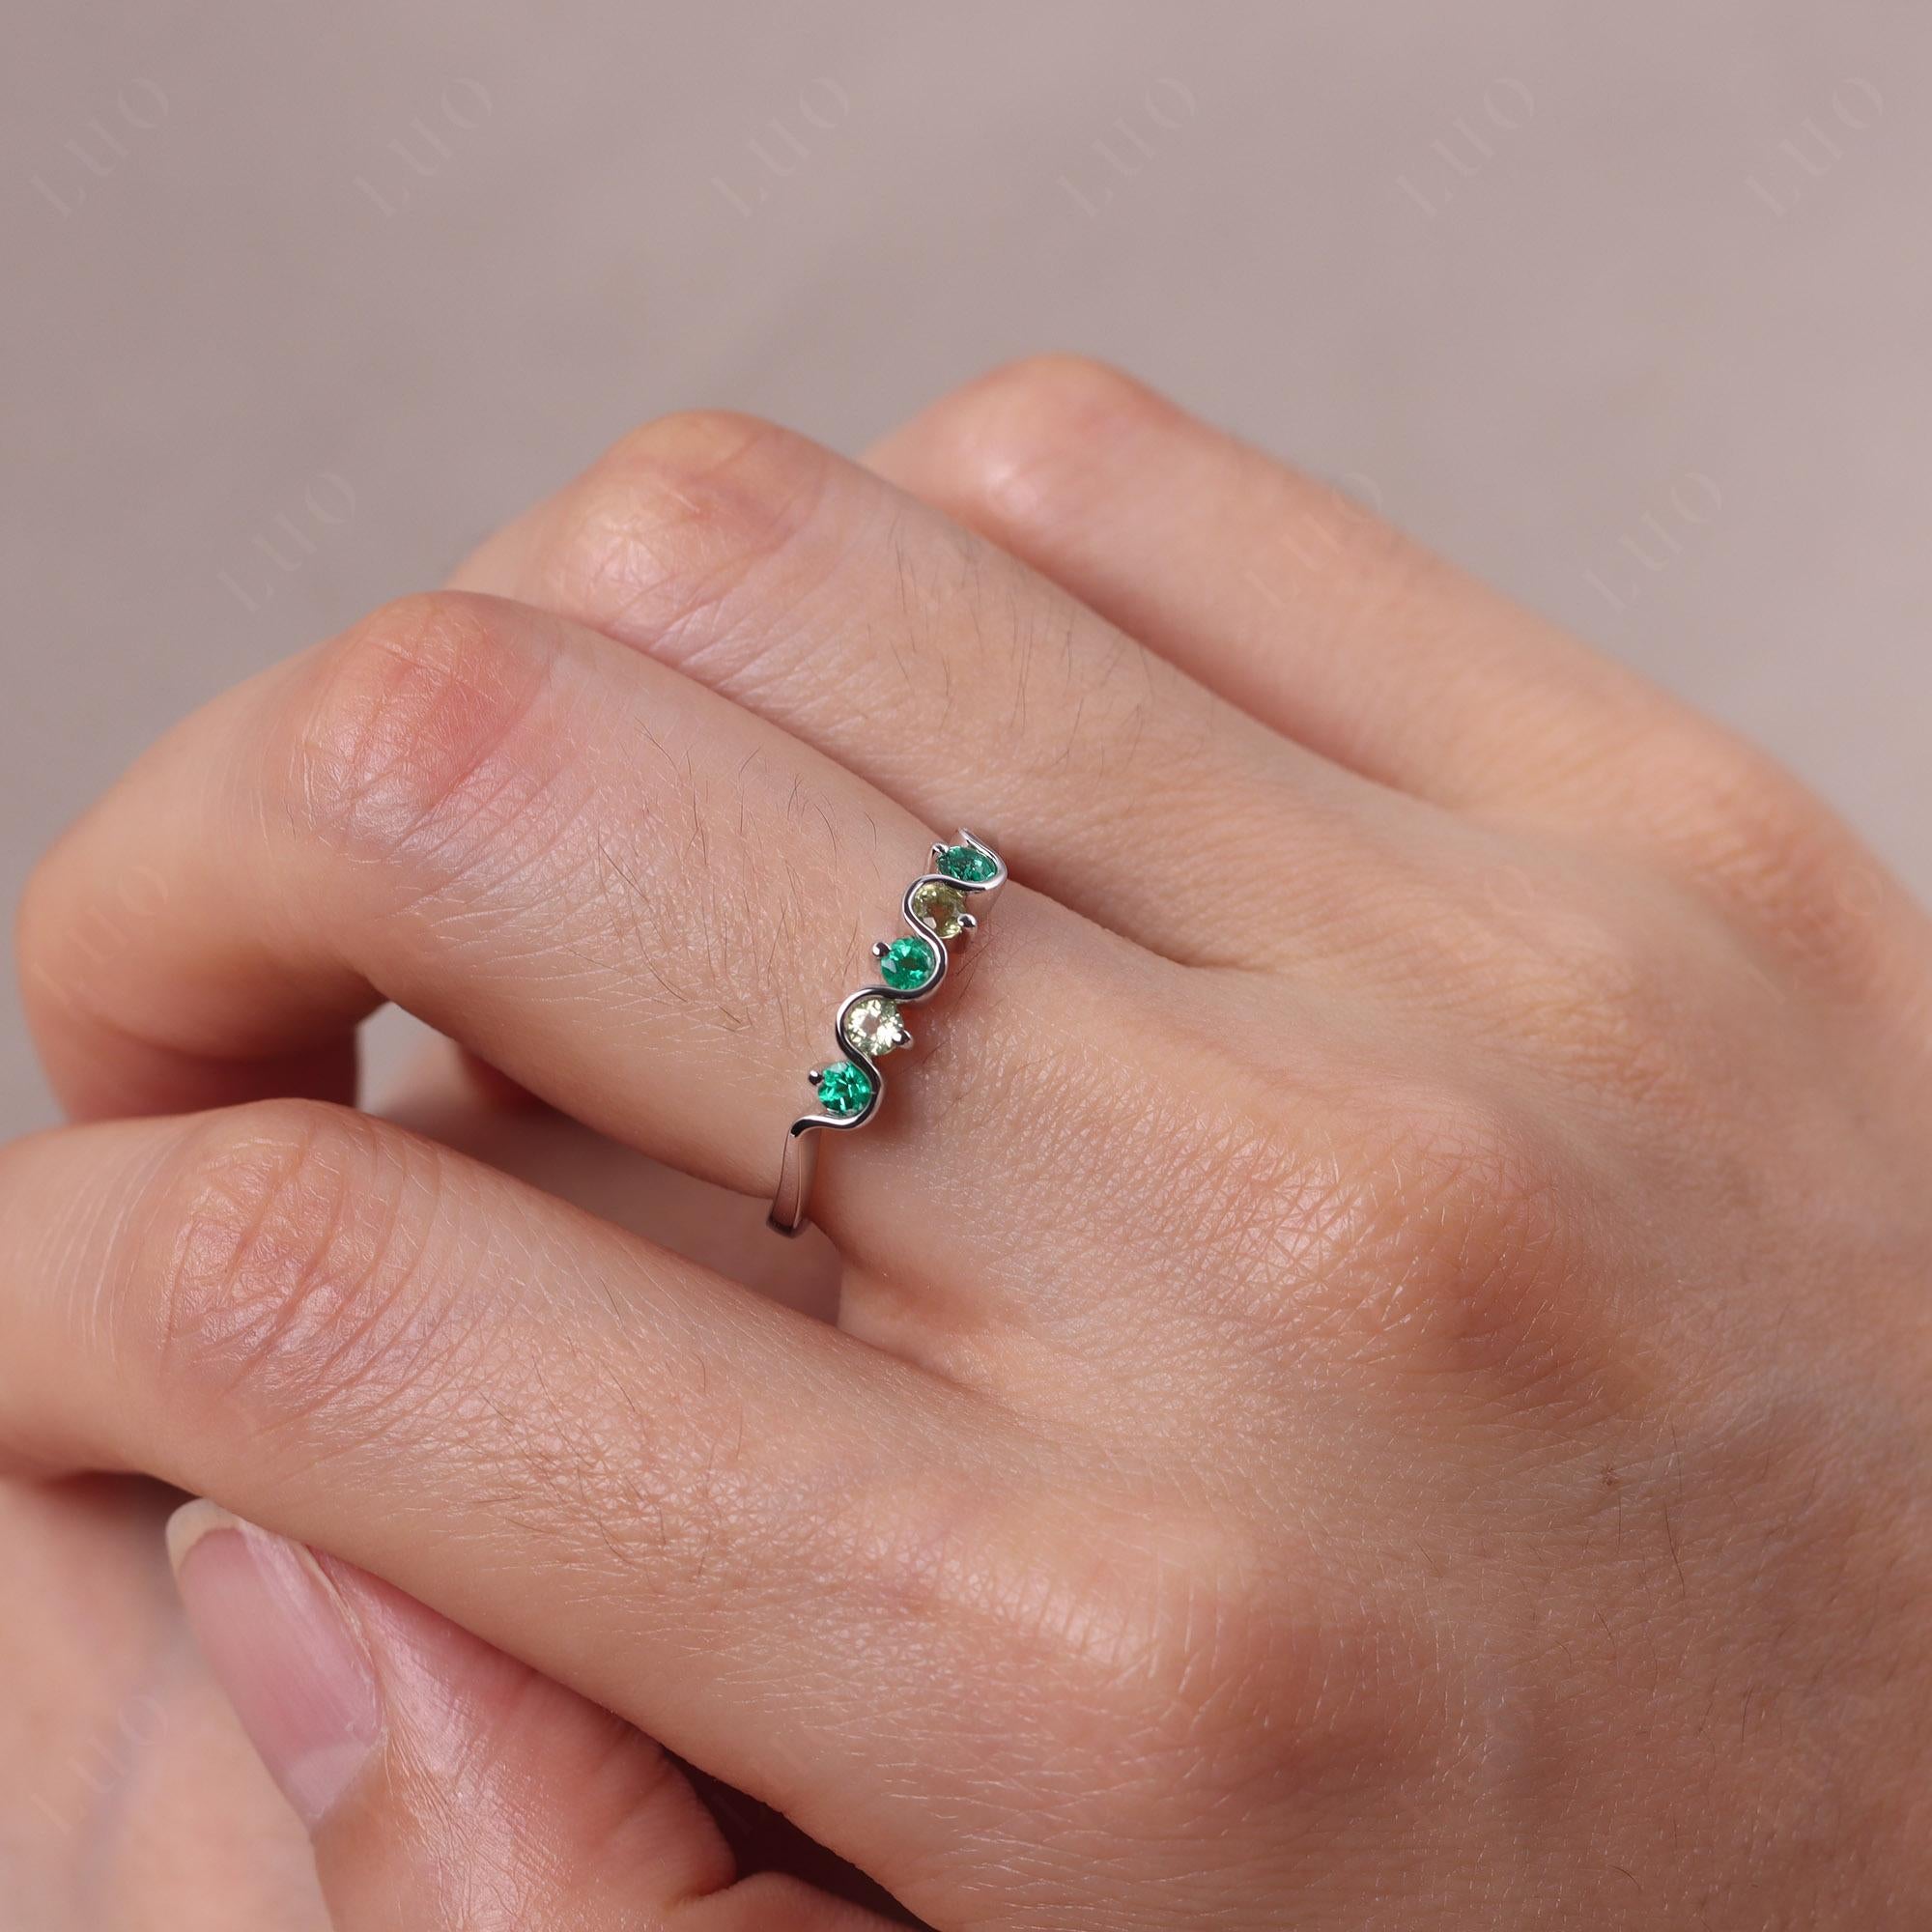 Lab Emerald and Peridot Band Ring - LUO Jewelry